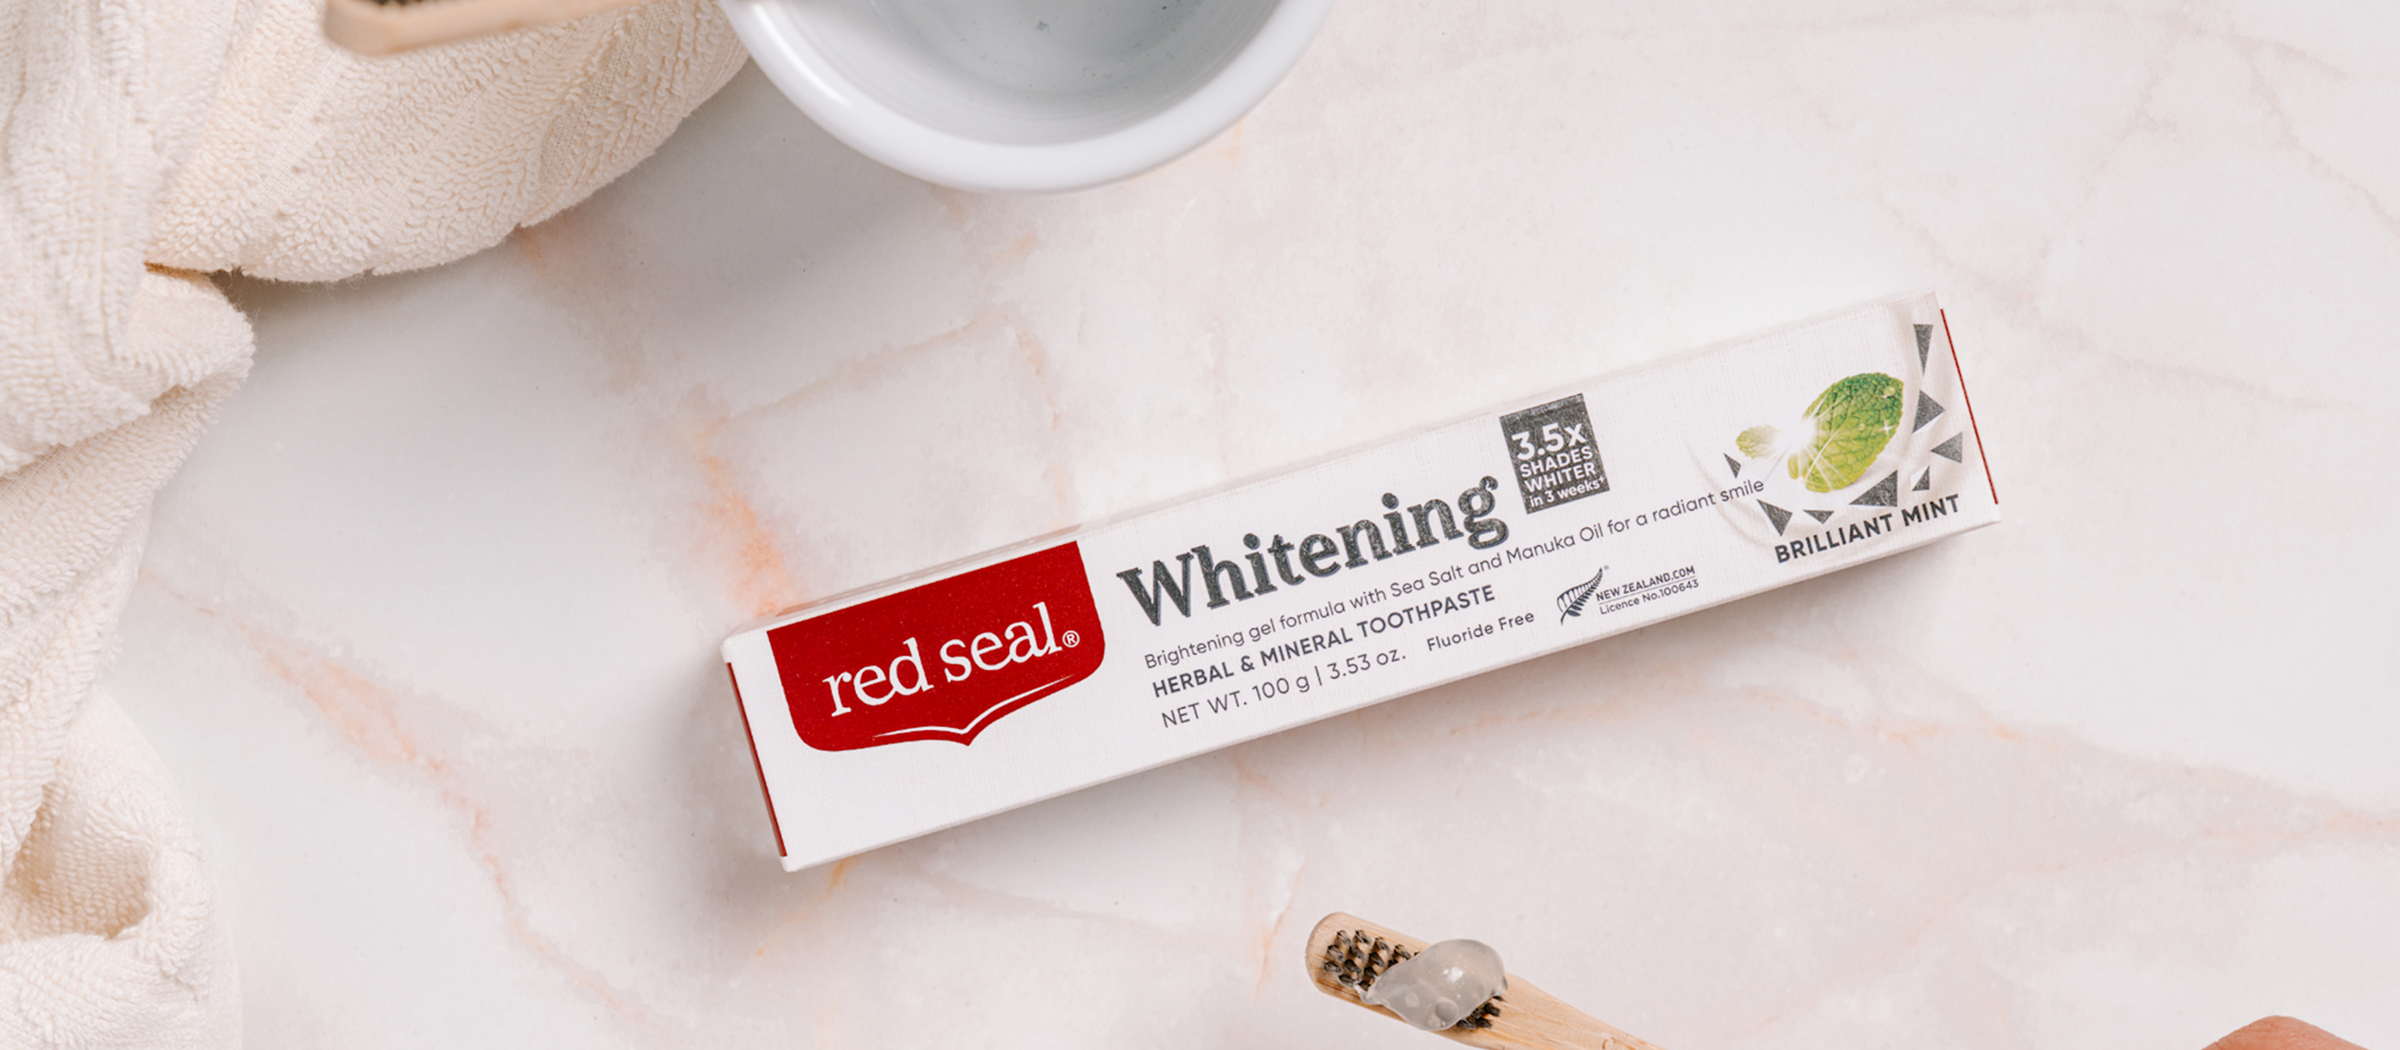 Red Seal Whitening Toothpaste with fluoride or fluoride-free 